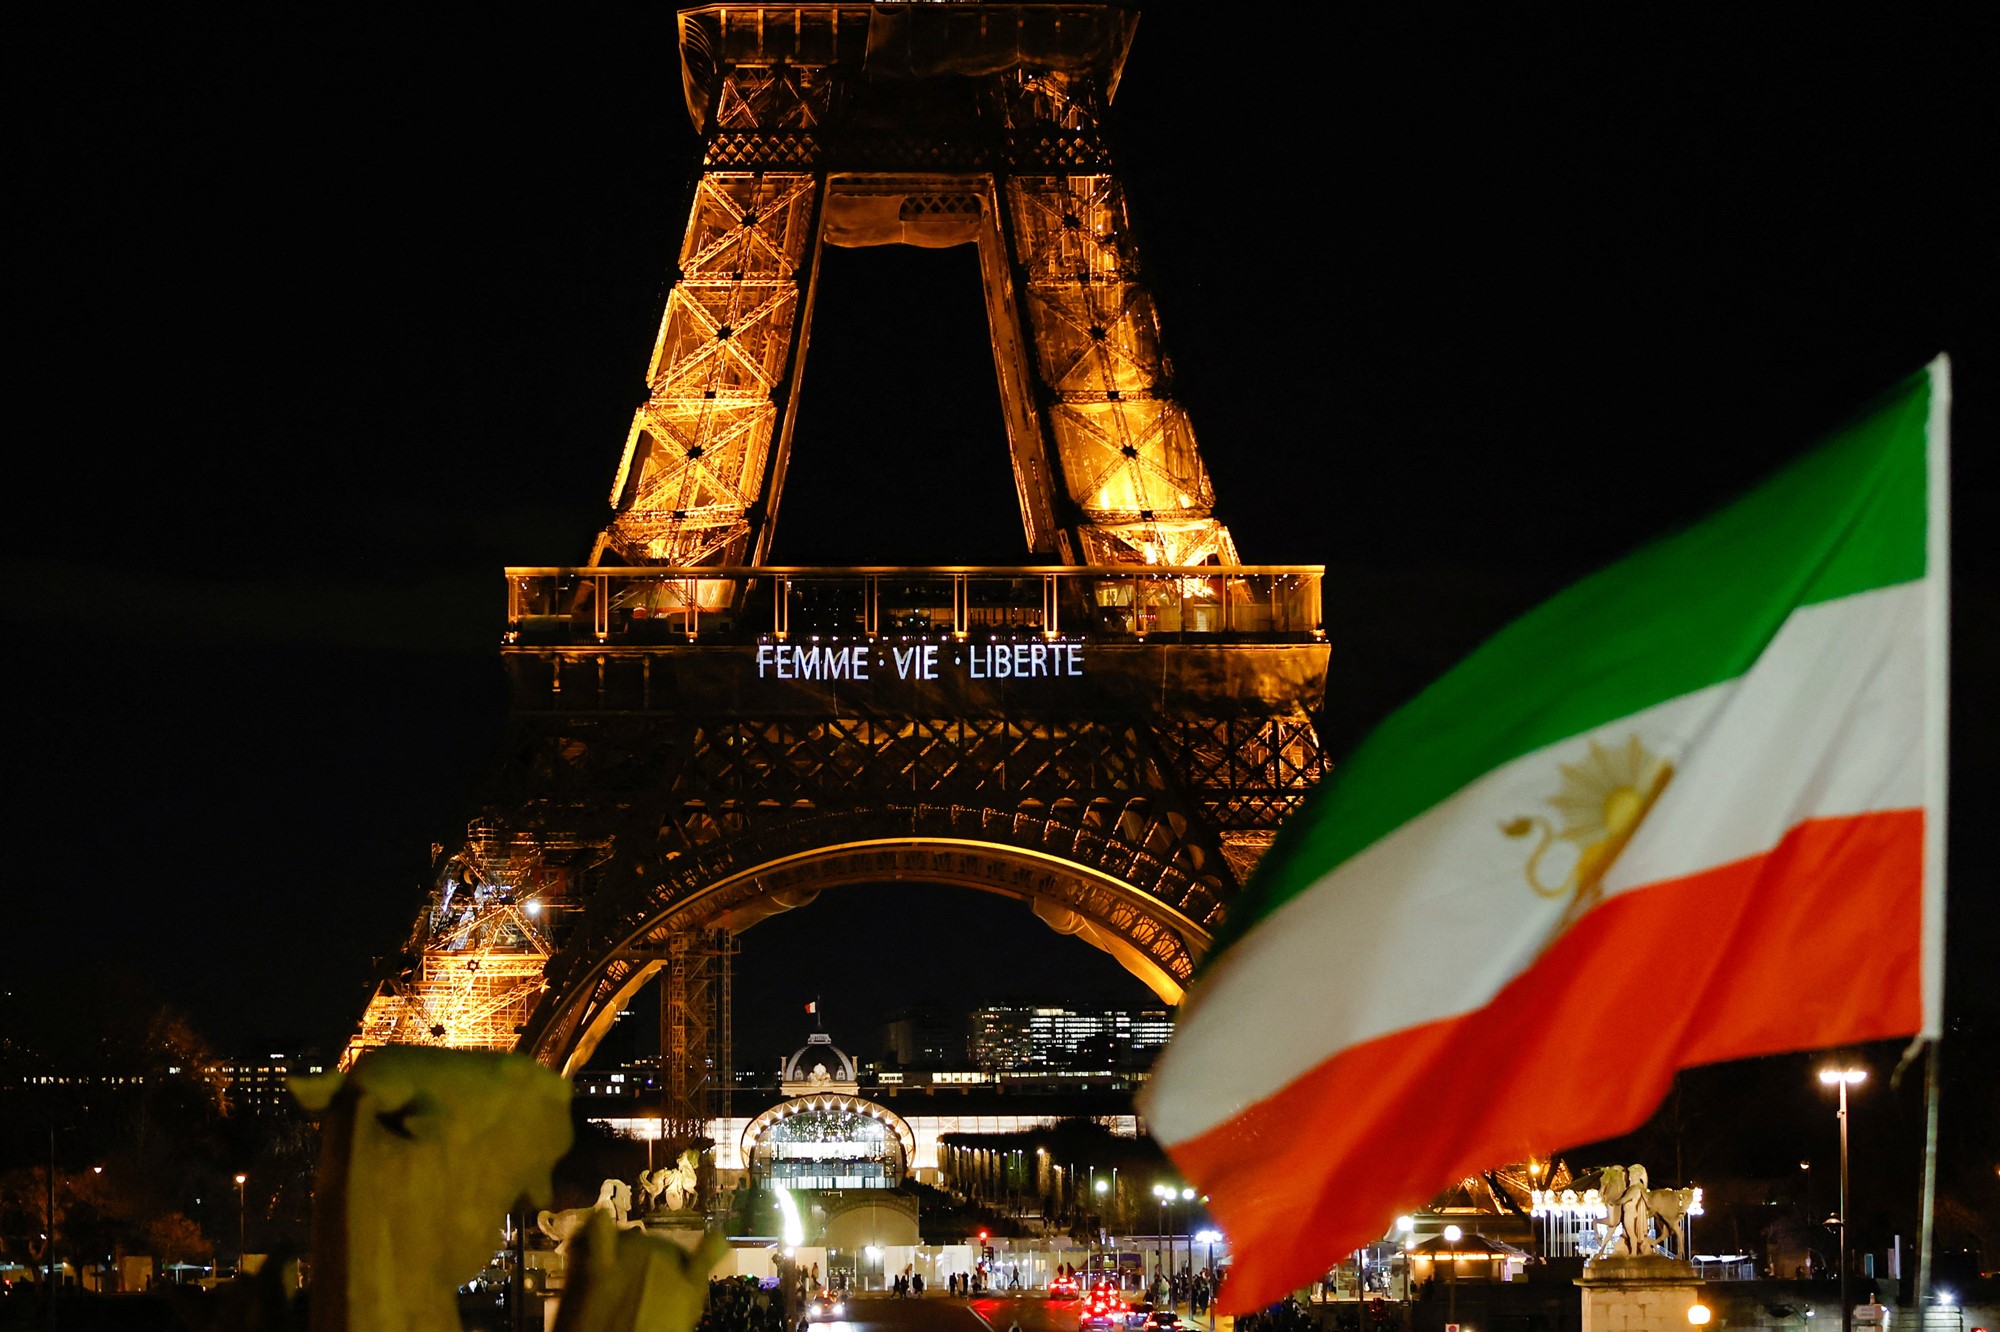 An Iran flag flies in front of the Eiffel Tower at night which reads "woman, life, freedom".